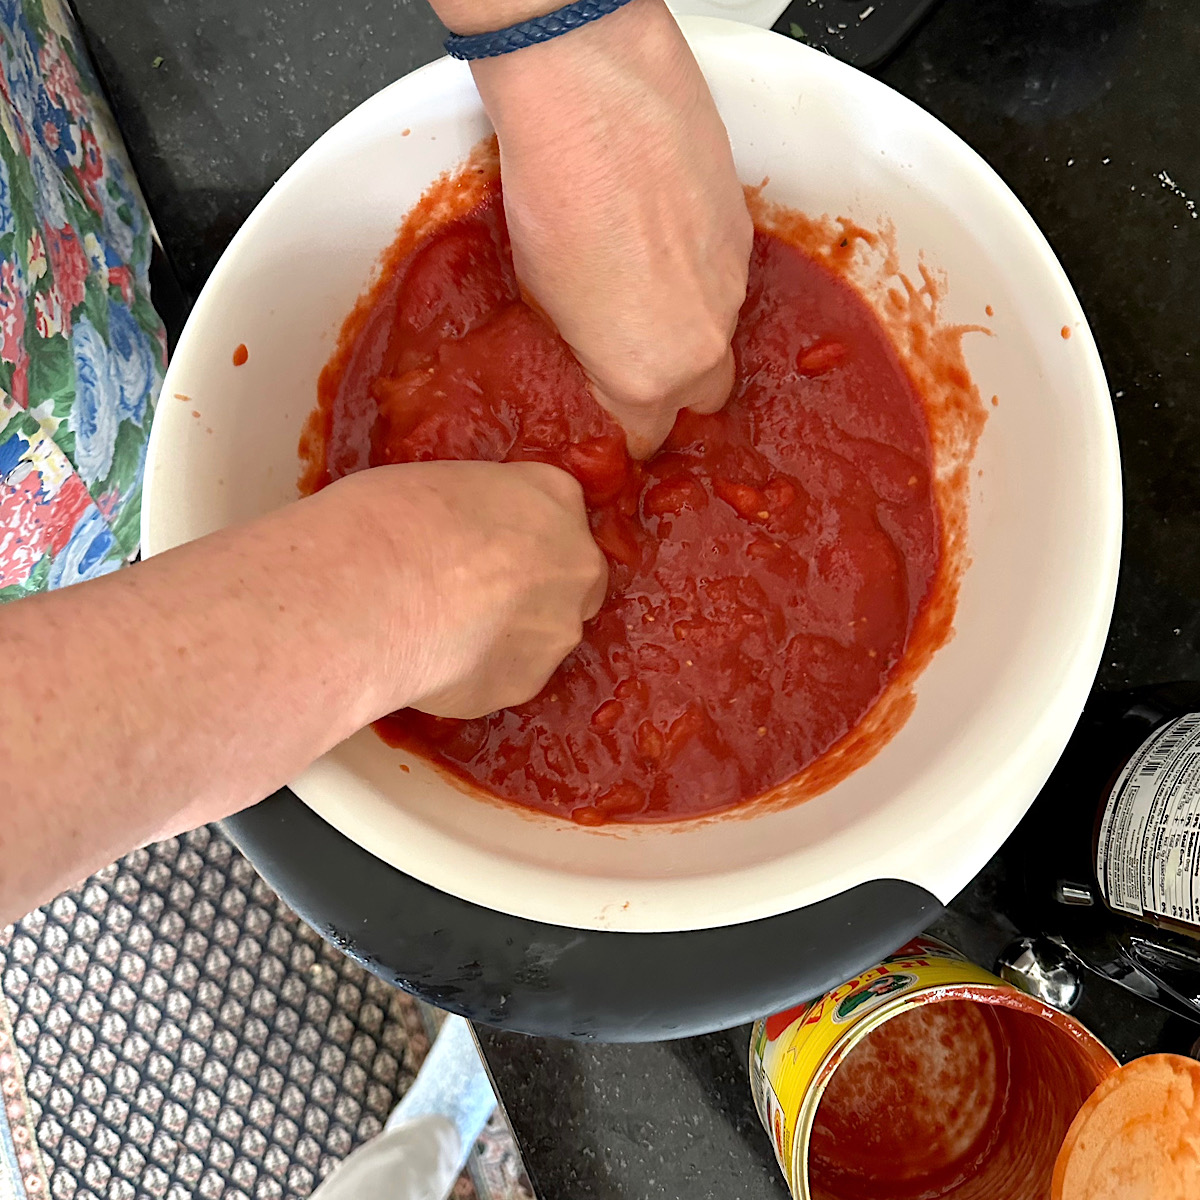 Squishing the San Marzano tomatoes with hands.